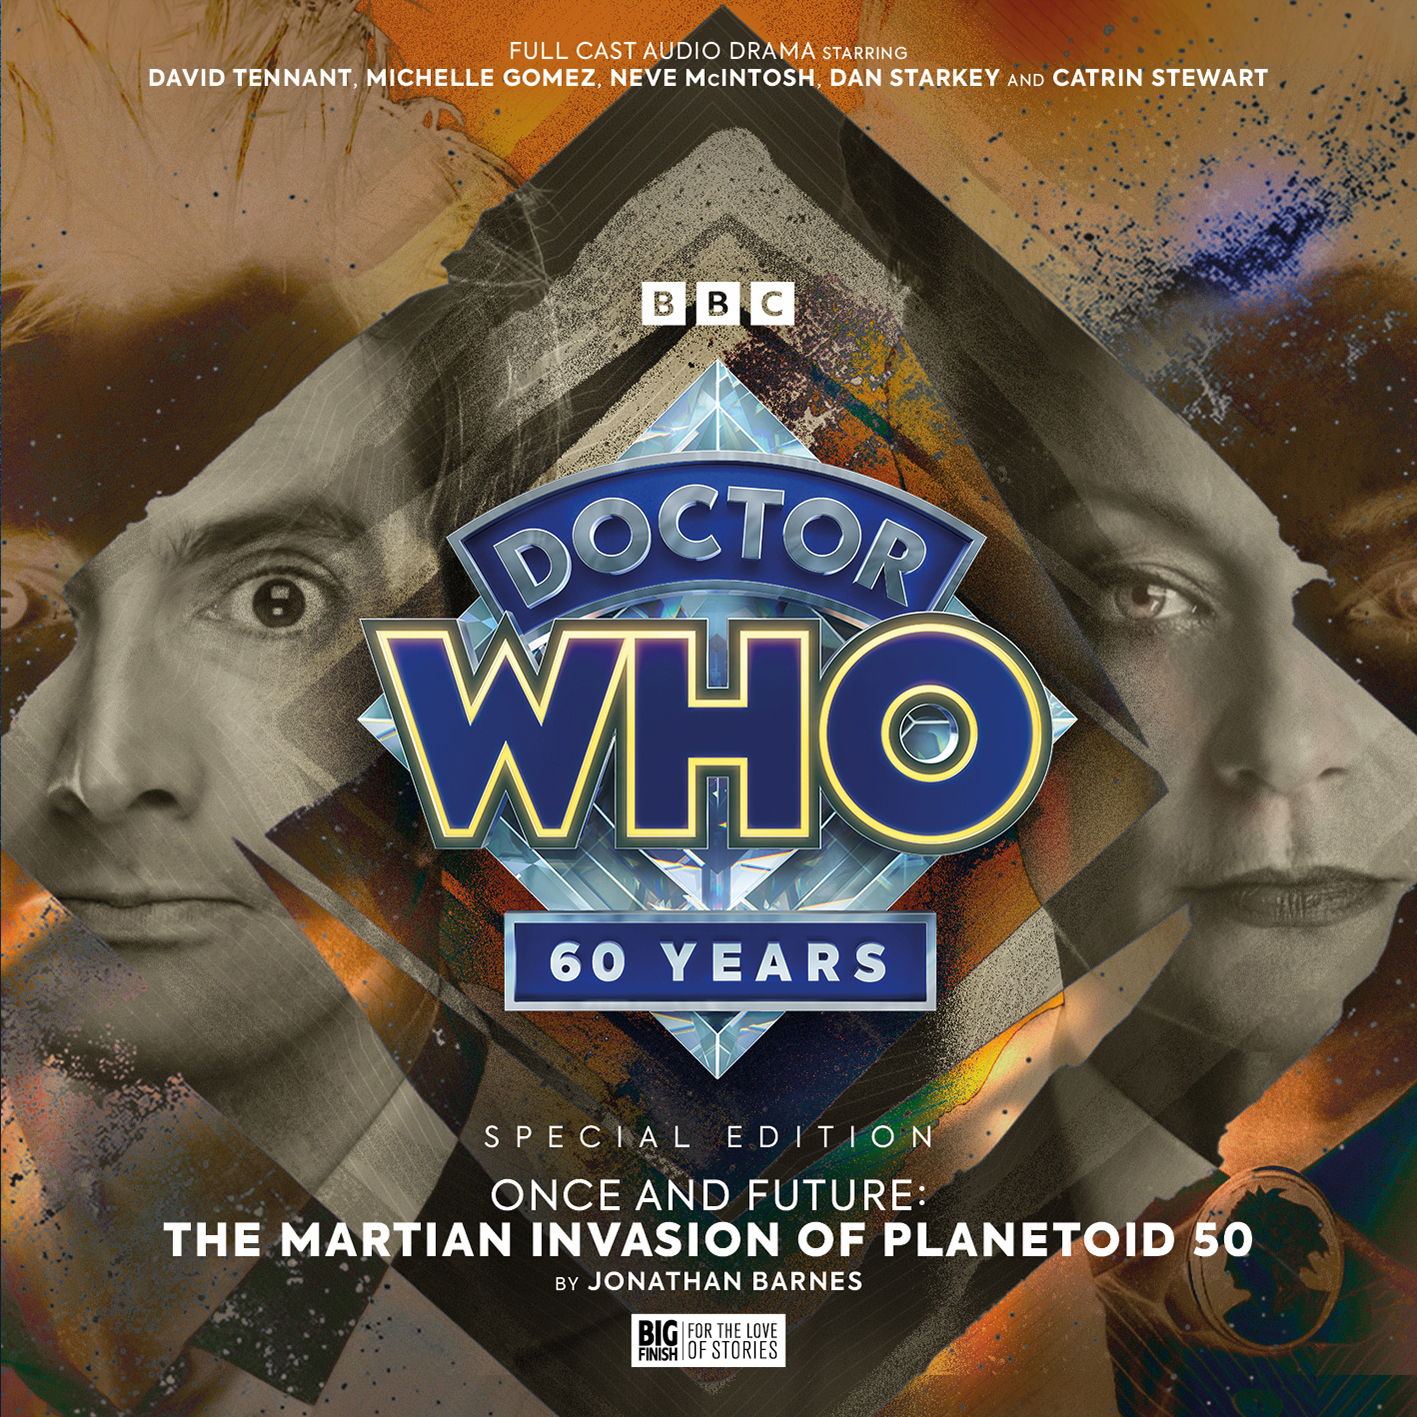 The Martian Invasion of Planetoid 50